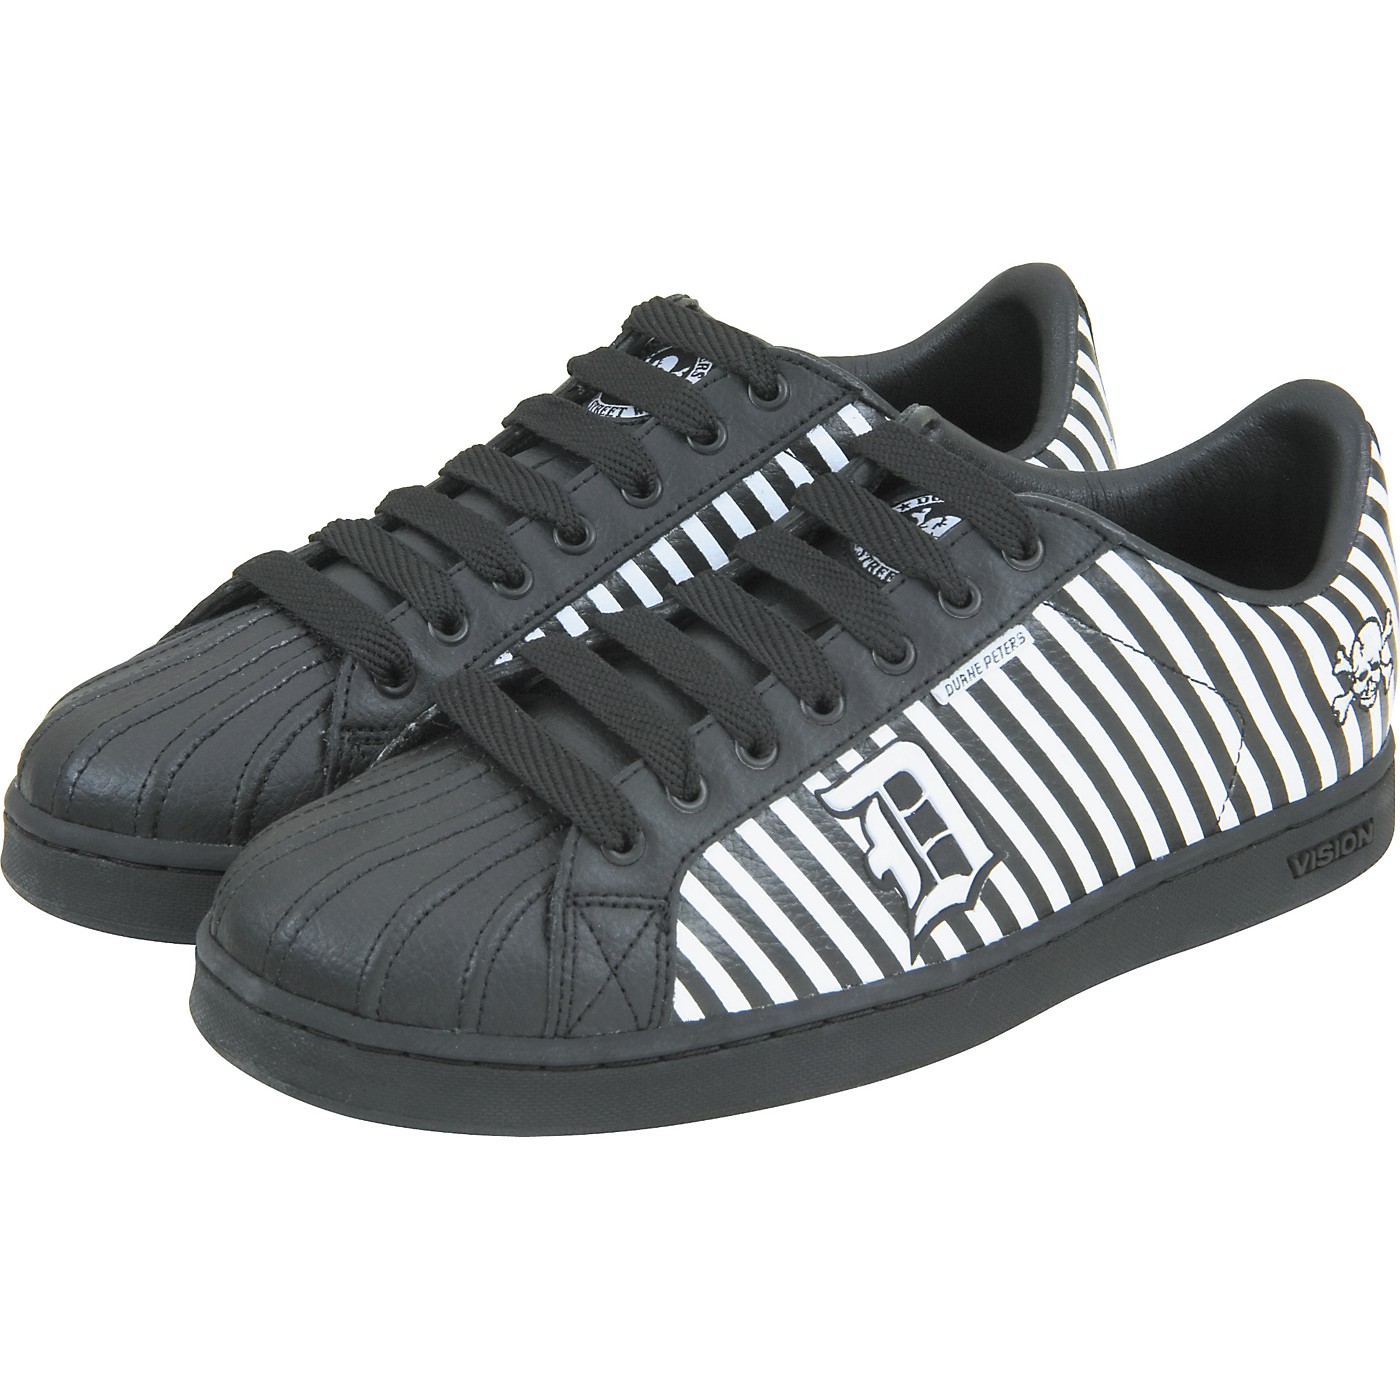 Draven Duane Peters Disaster Stripes Low Top Shoes - Woodwind & Brasswind